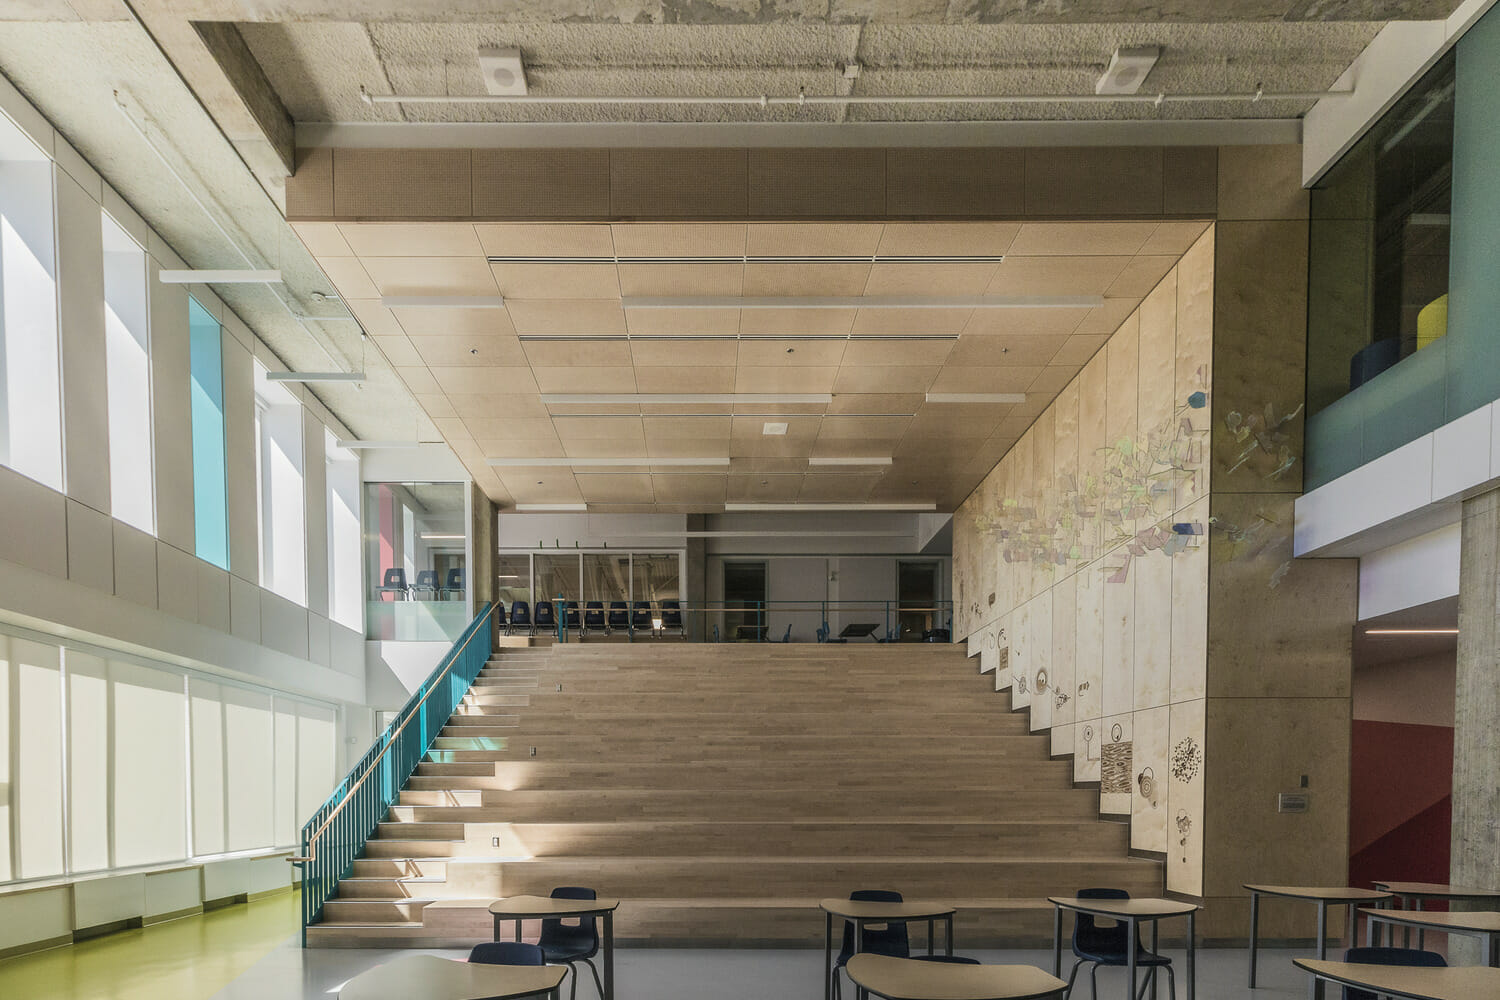 A school building with stairs and tables.